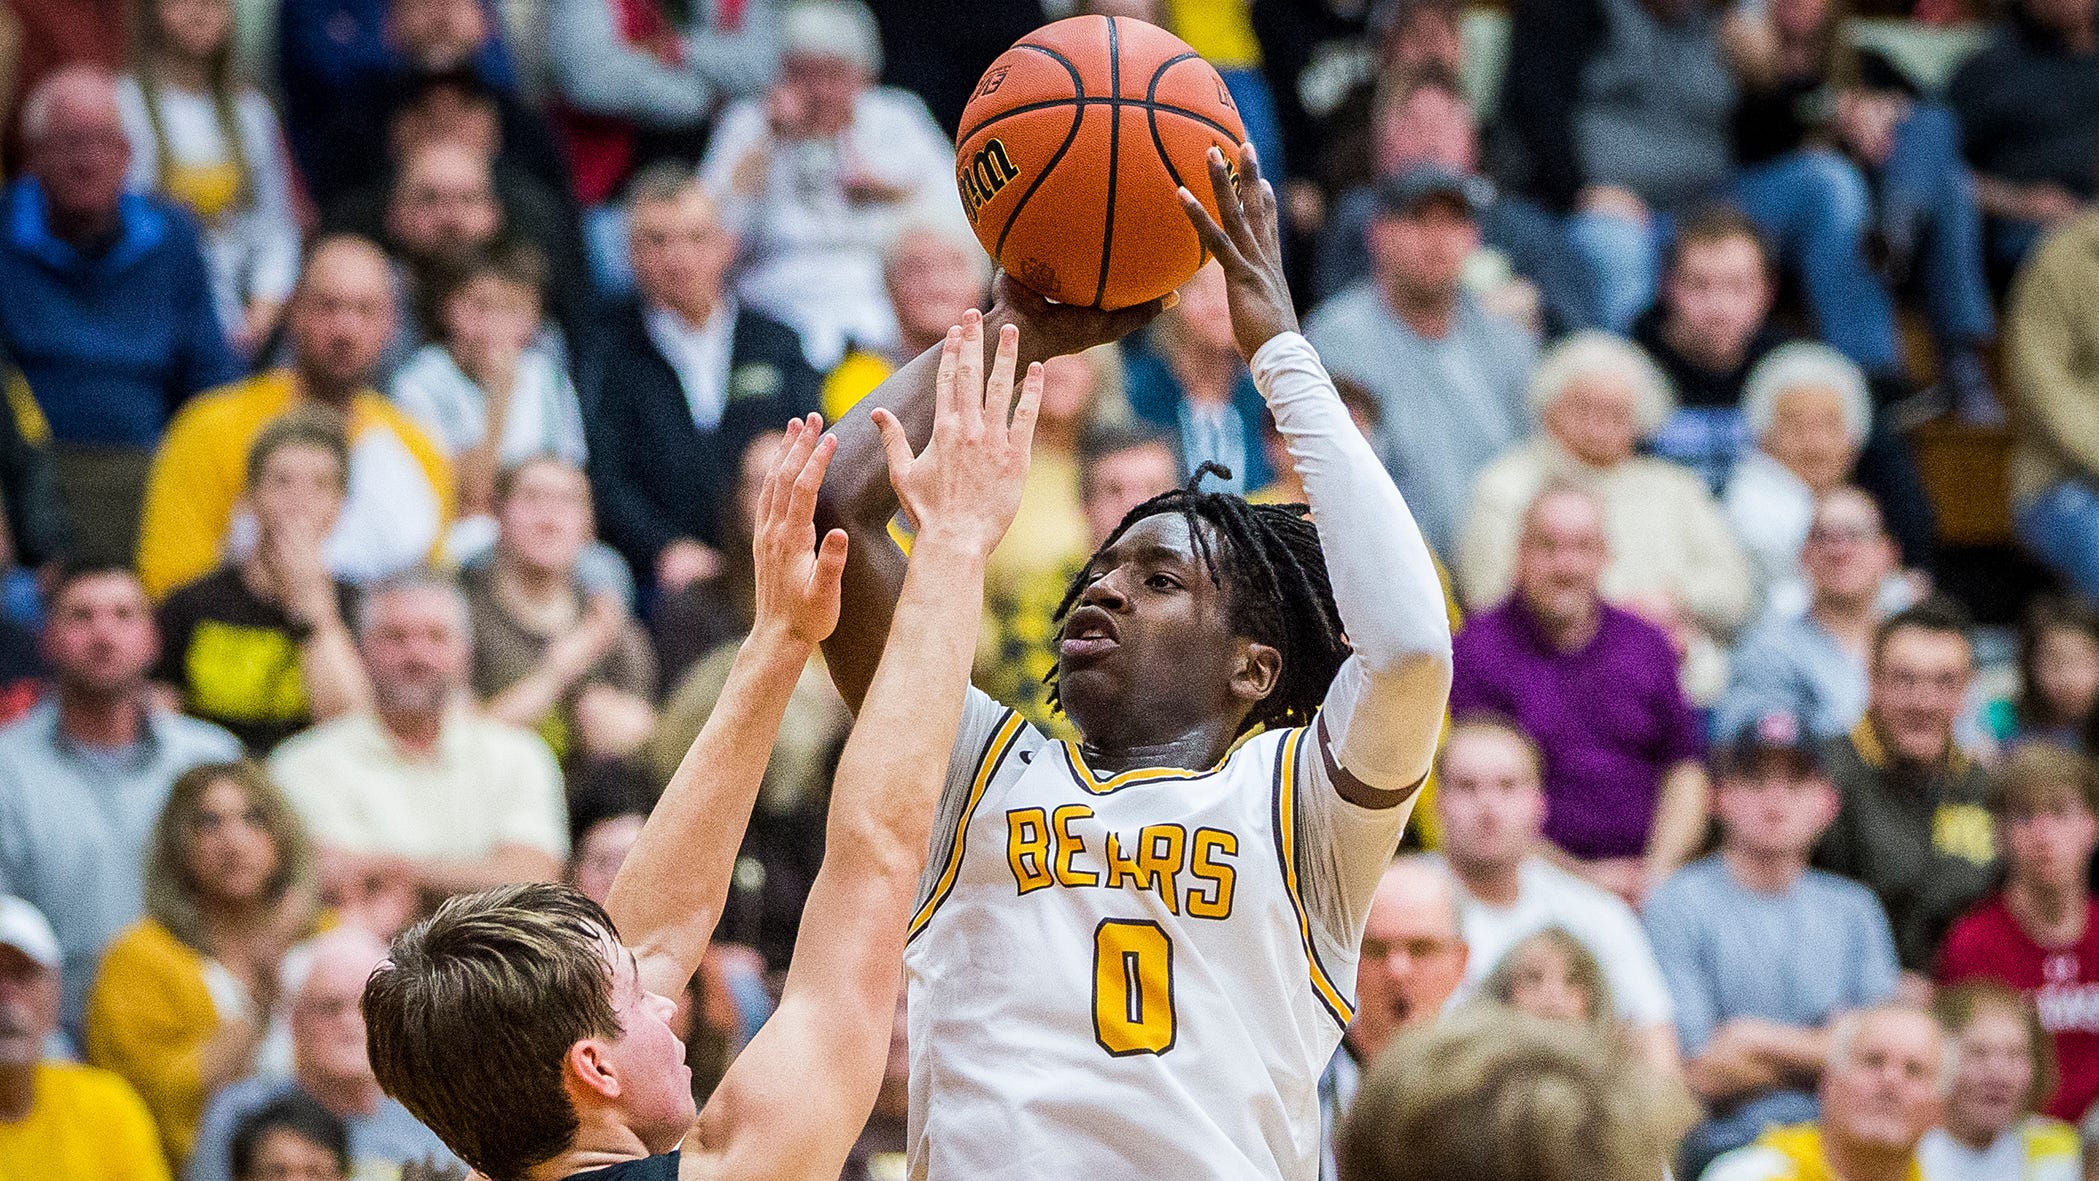 Indiana basketball tournament IHSAA 2A regional preview, predictions